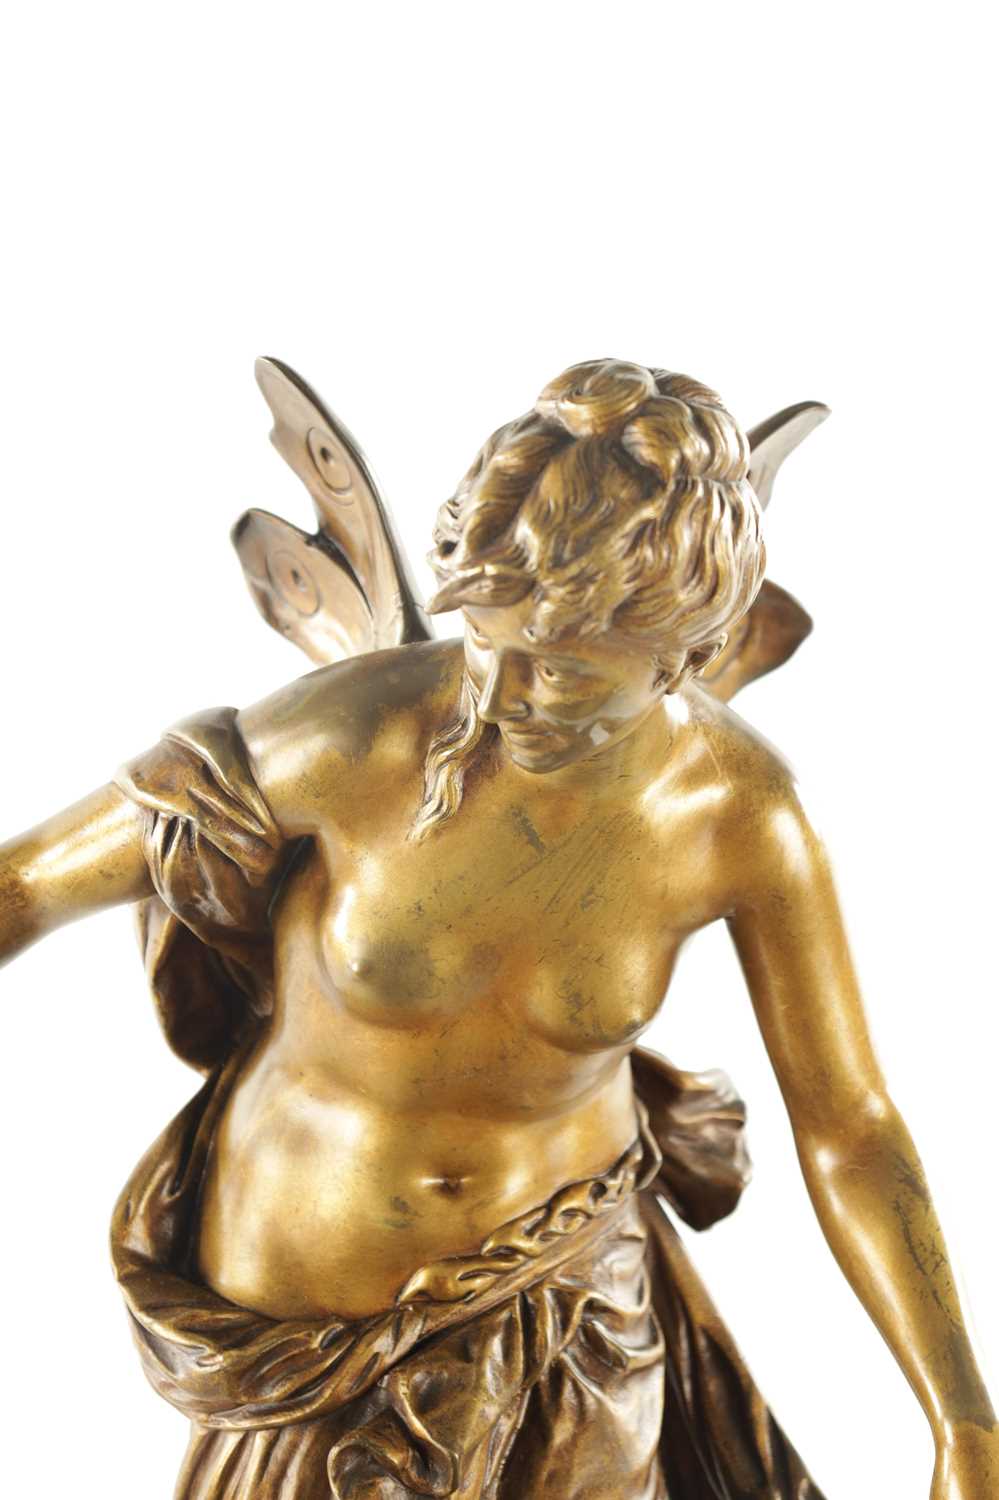 JEAN BULIO (FRENCH 1827 - 1911) A 19TH CENTURY GILT BRONZE FIGURE DEPICTING ‘PSYCHE AND LOVE’ - Image 4 of 8